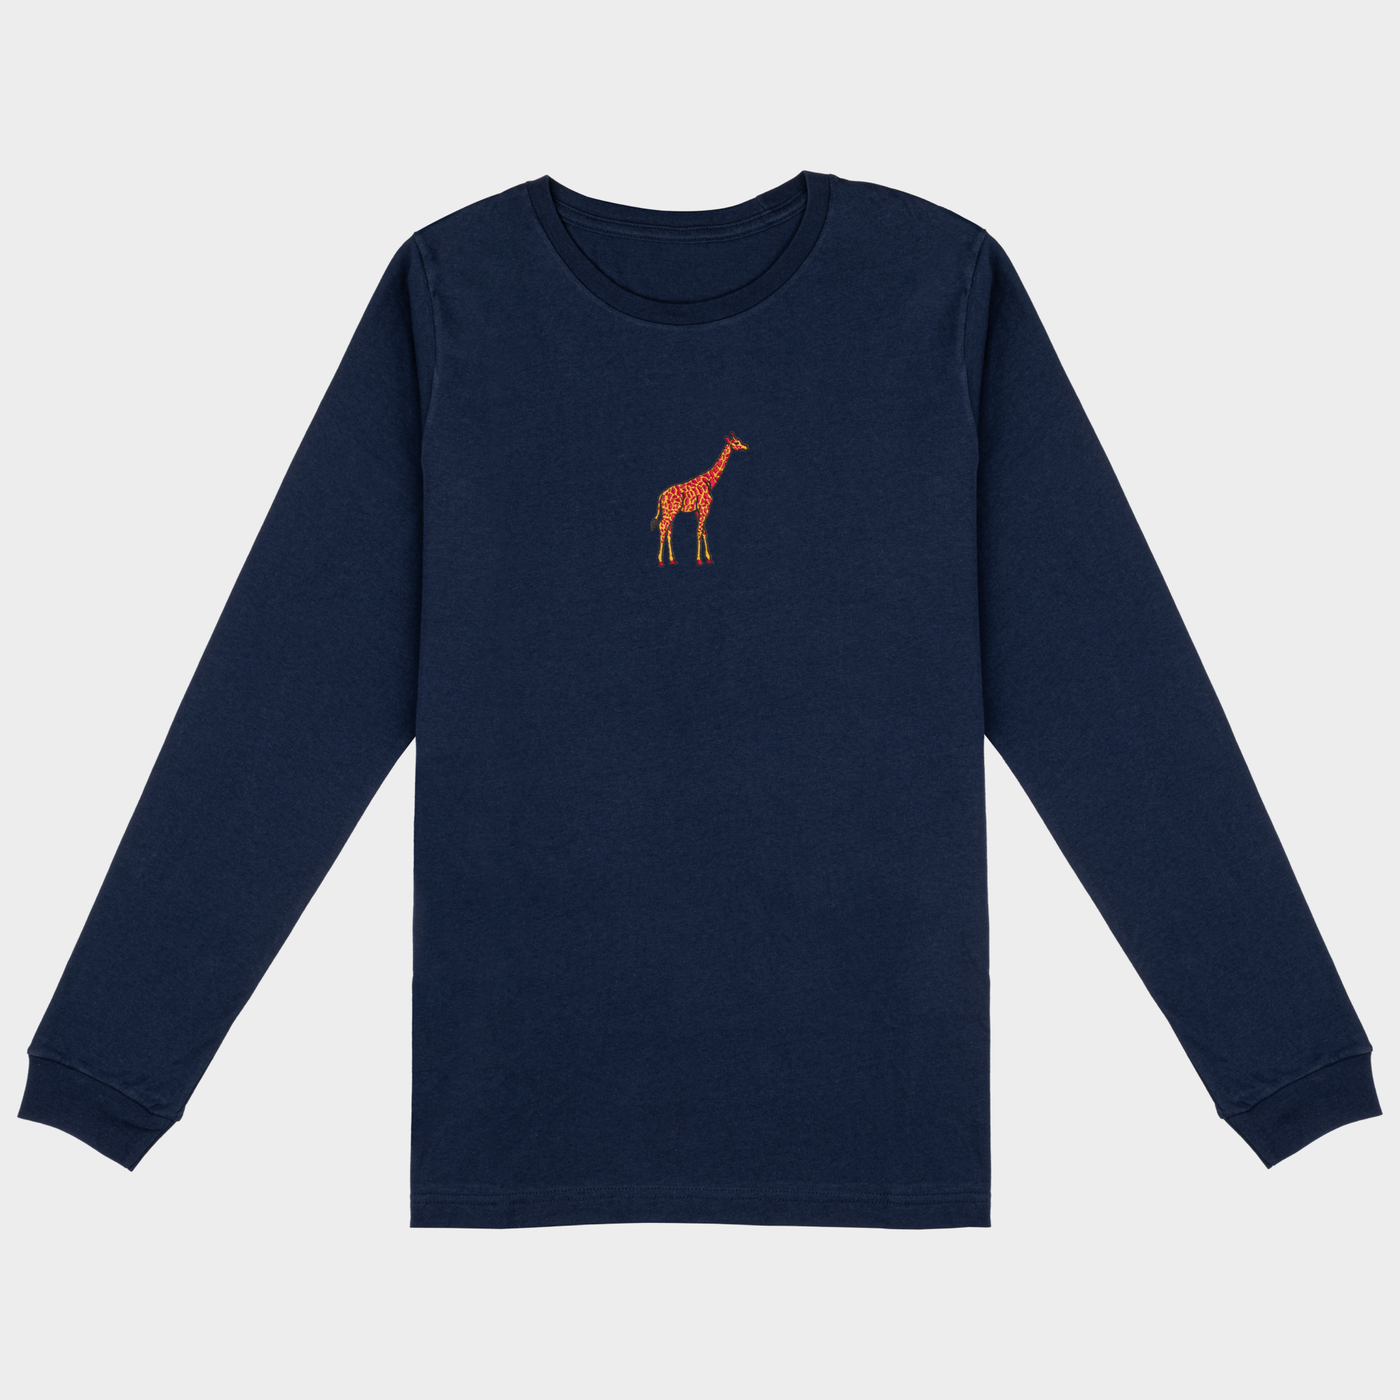 Bobby's Planet Men's Embroidered Giraffe Long Sleeve Shirt from African Animals Collection in Navy Color#color_navy